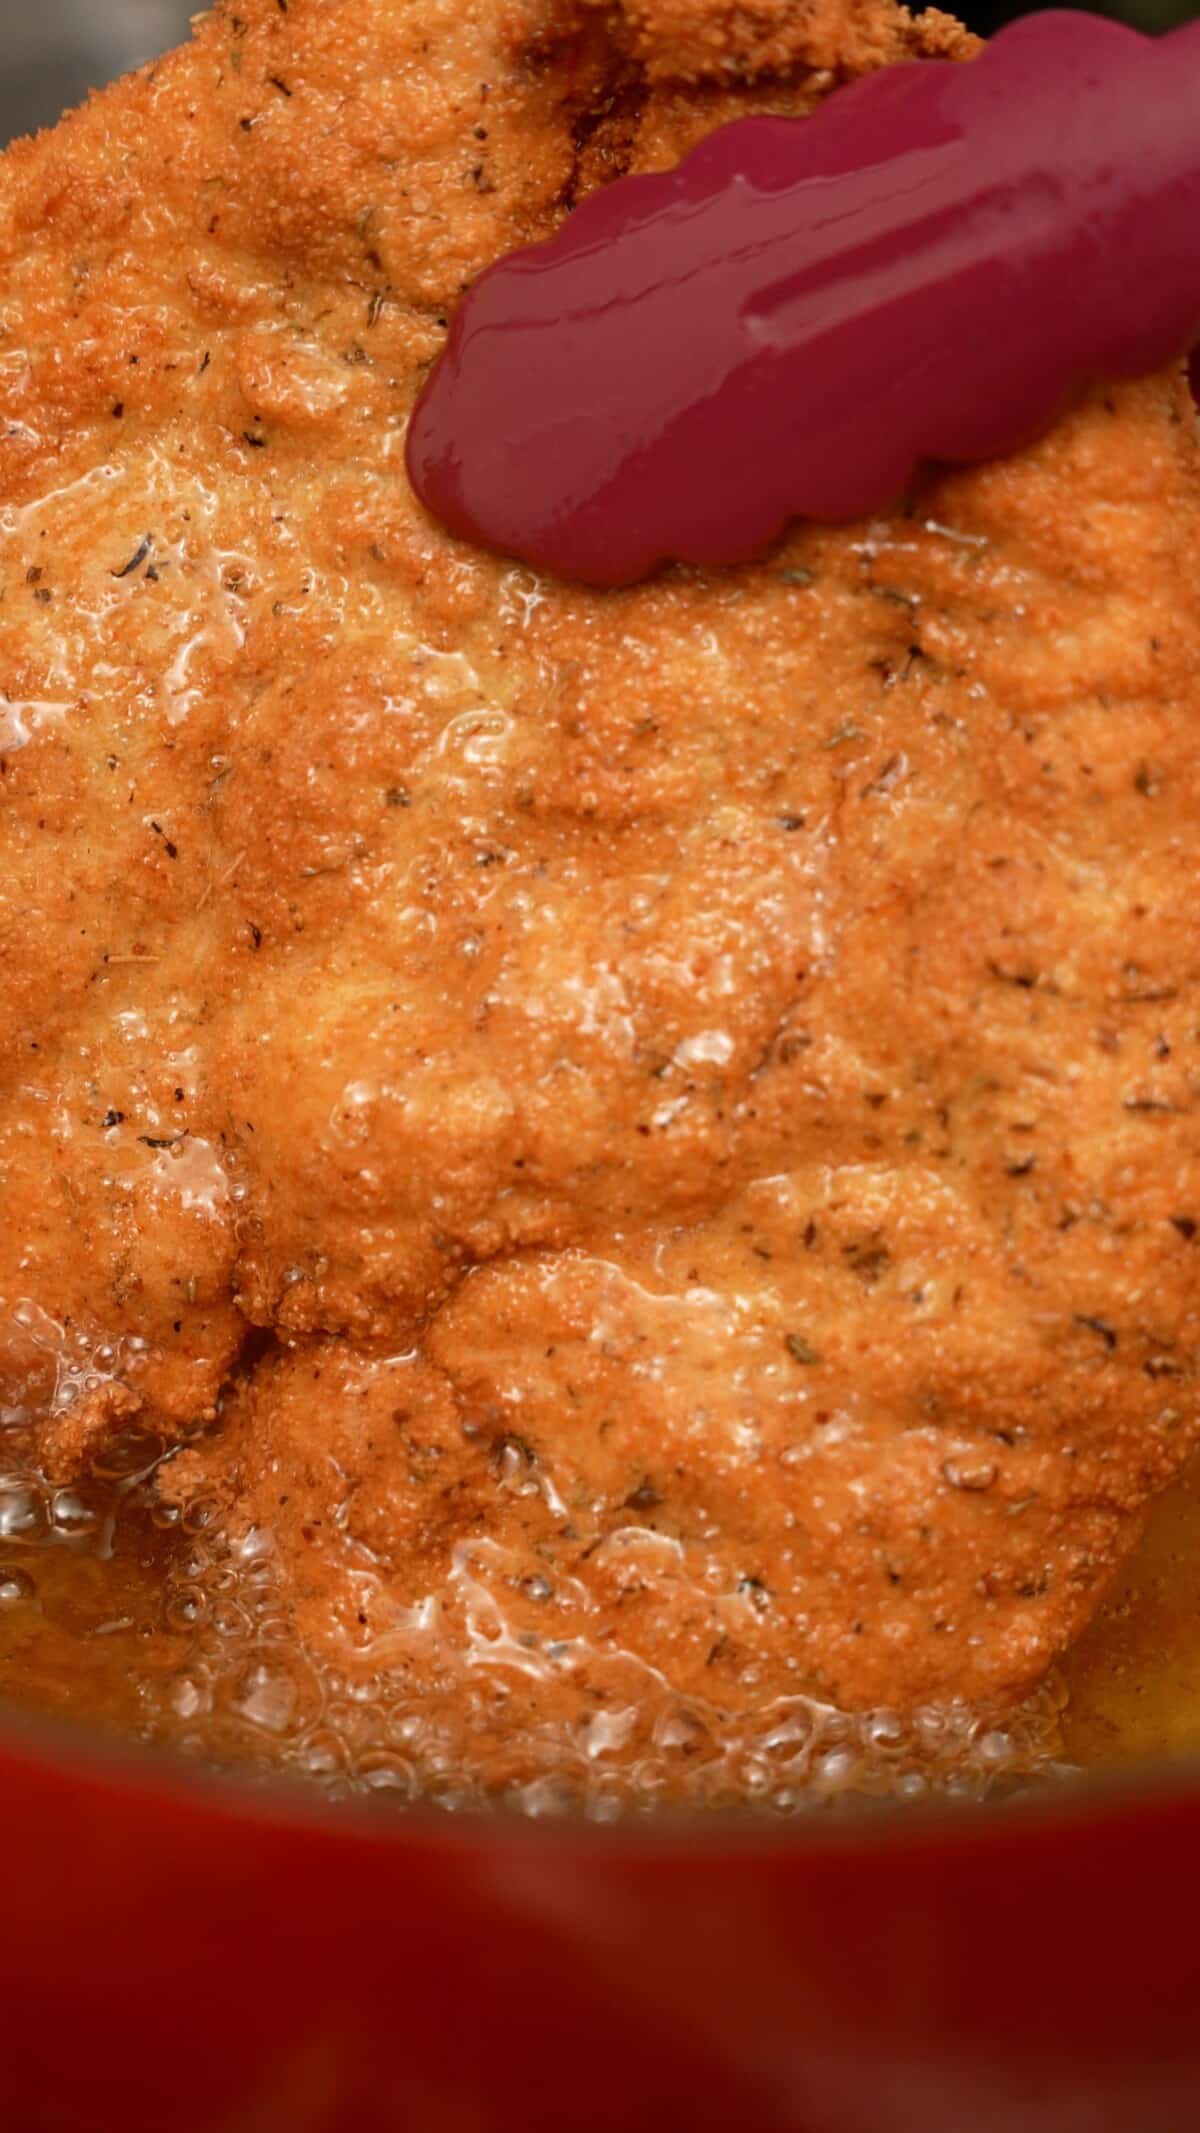 Chicken cutlet being deep fried in oil in a dutch oven.